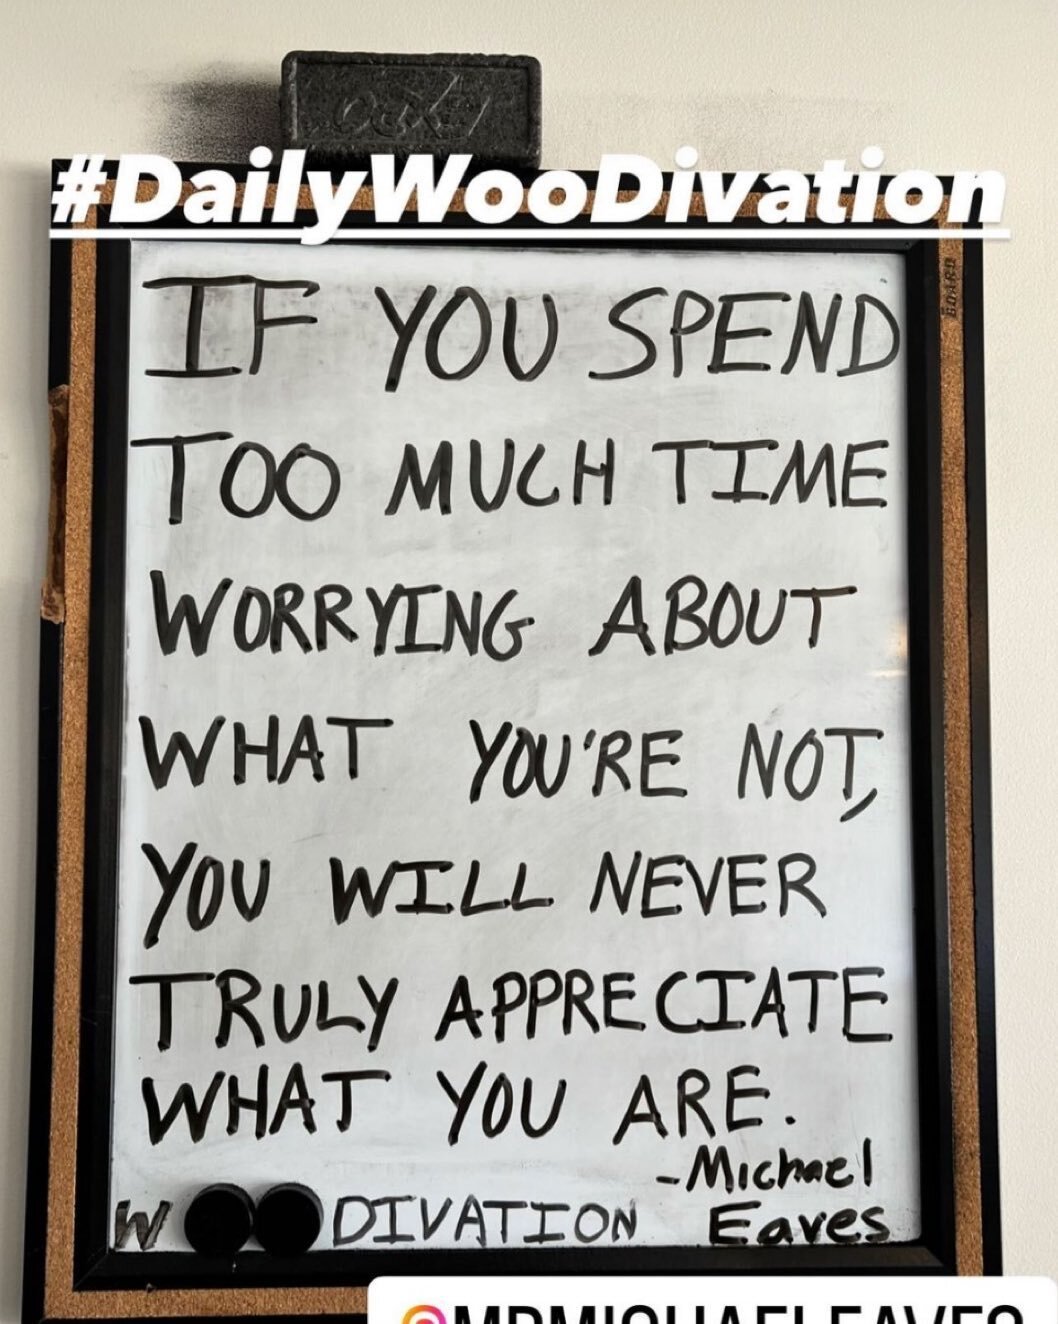 You know you&rsquo;ve made it if you make @woodbigsity&rsquo;s #DailyWooDivation!